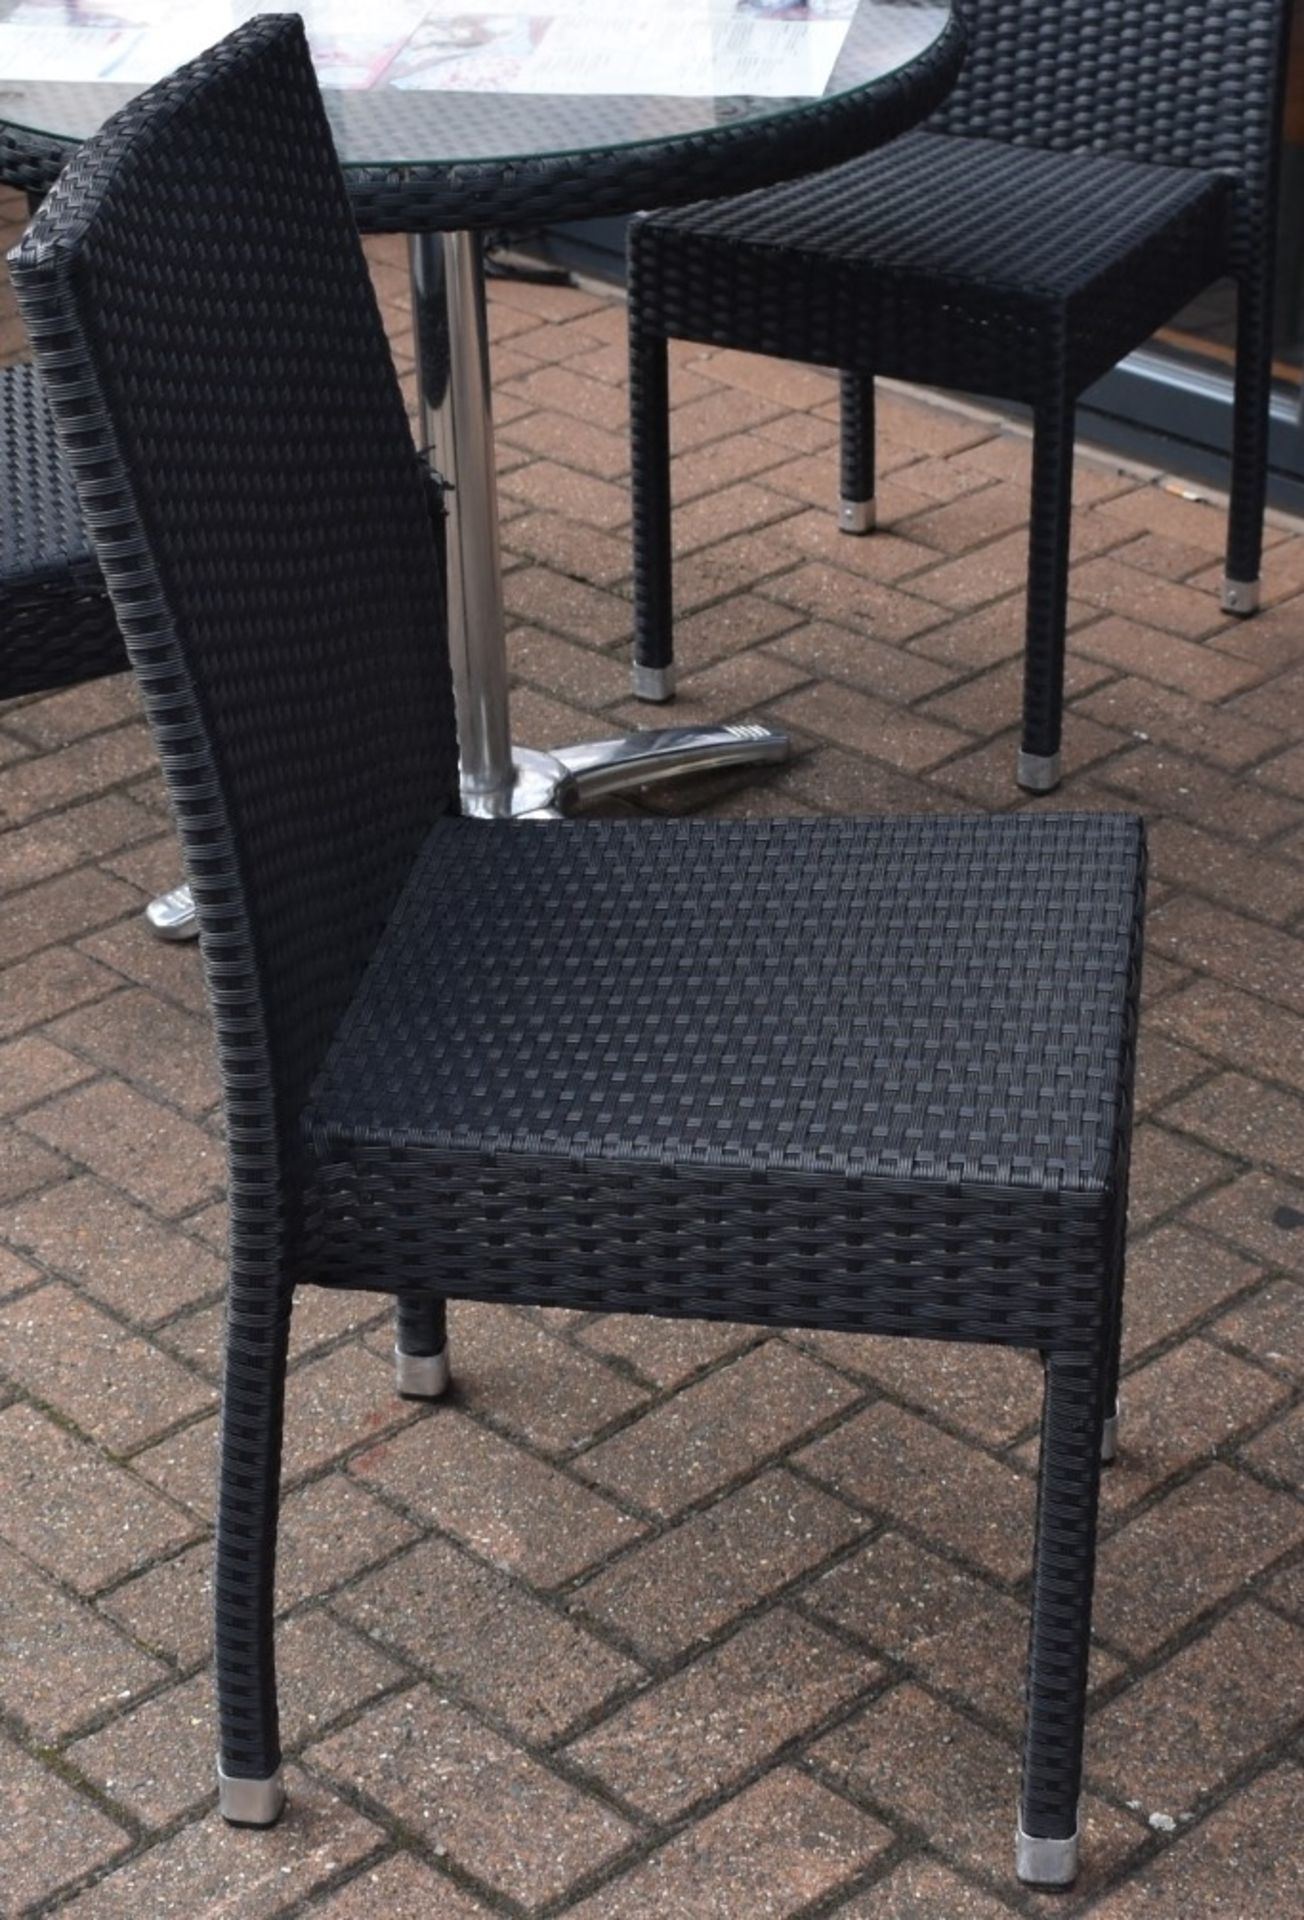 1 x Rattan Garden Table and Chair Set - Includes 1 x Square Rattan Table With Chrome Base and - Image 7 of 8